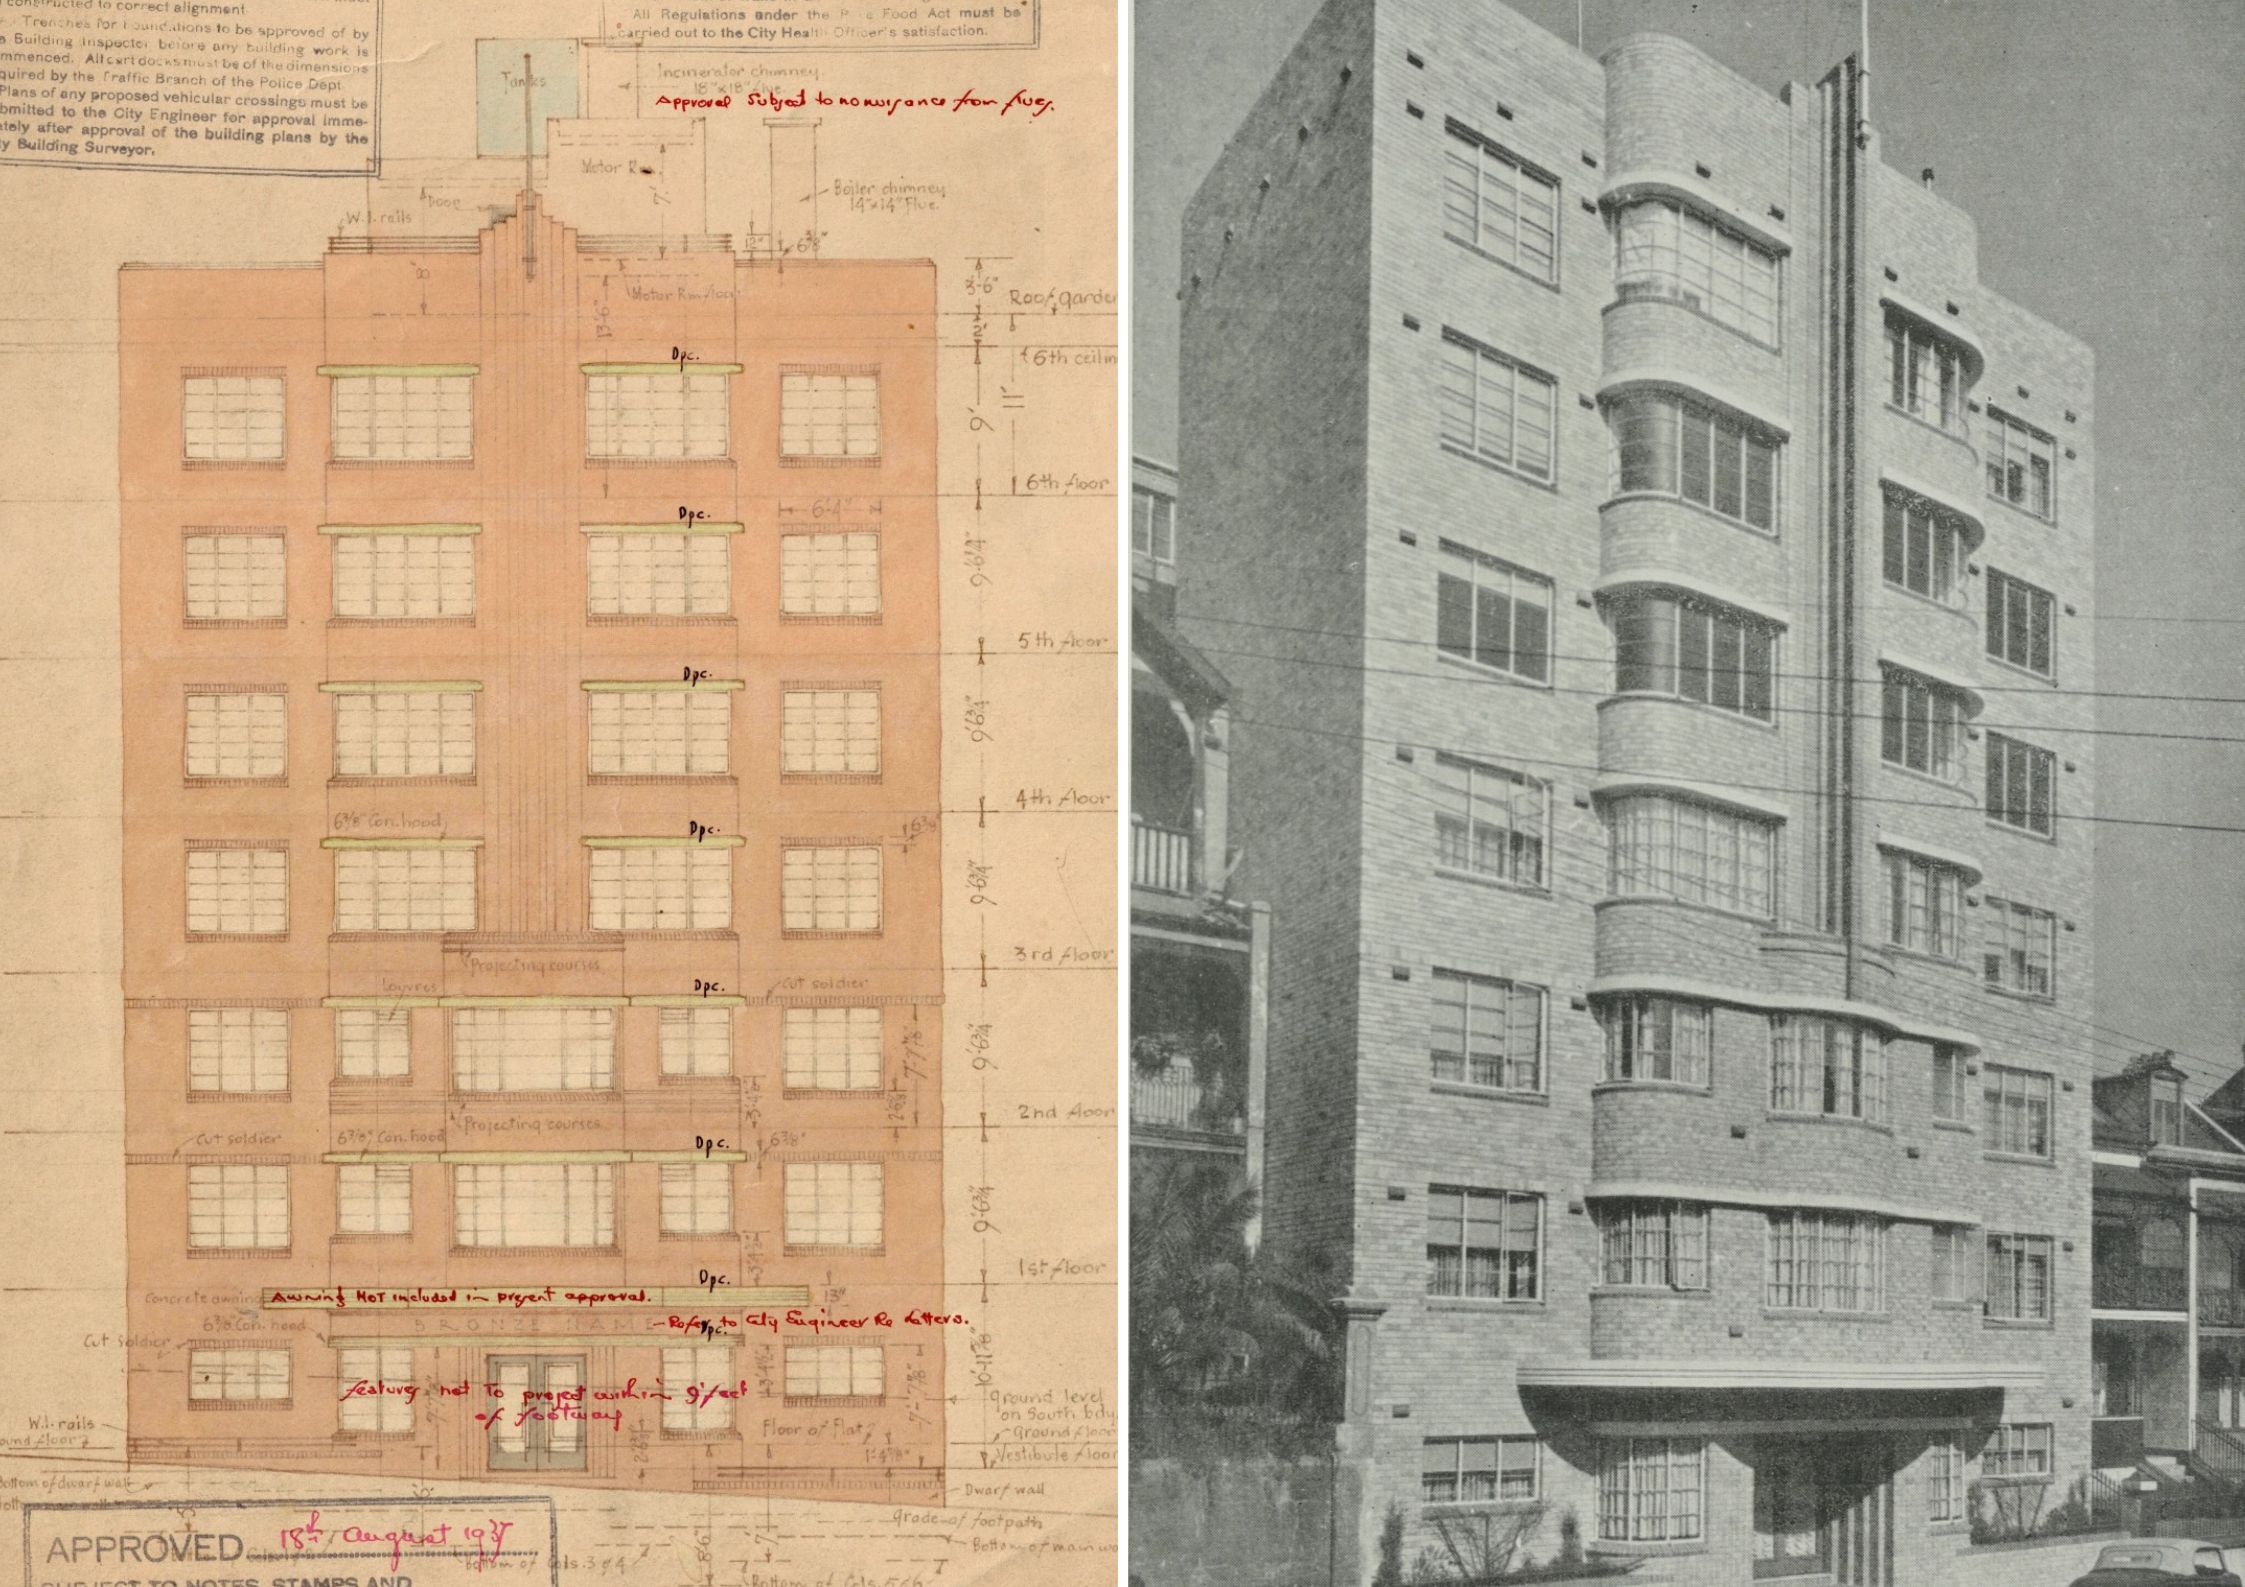 Plan and photograph of Art Deco building